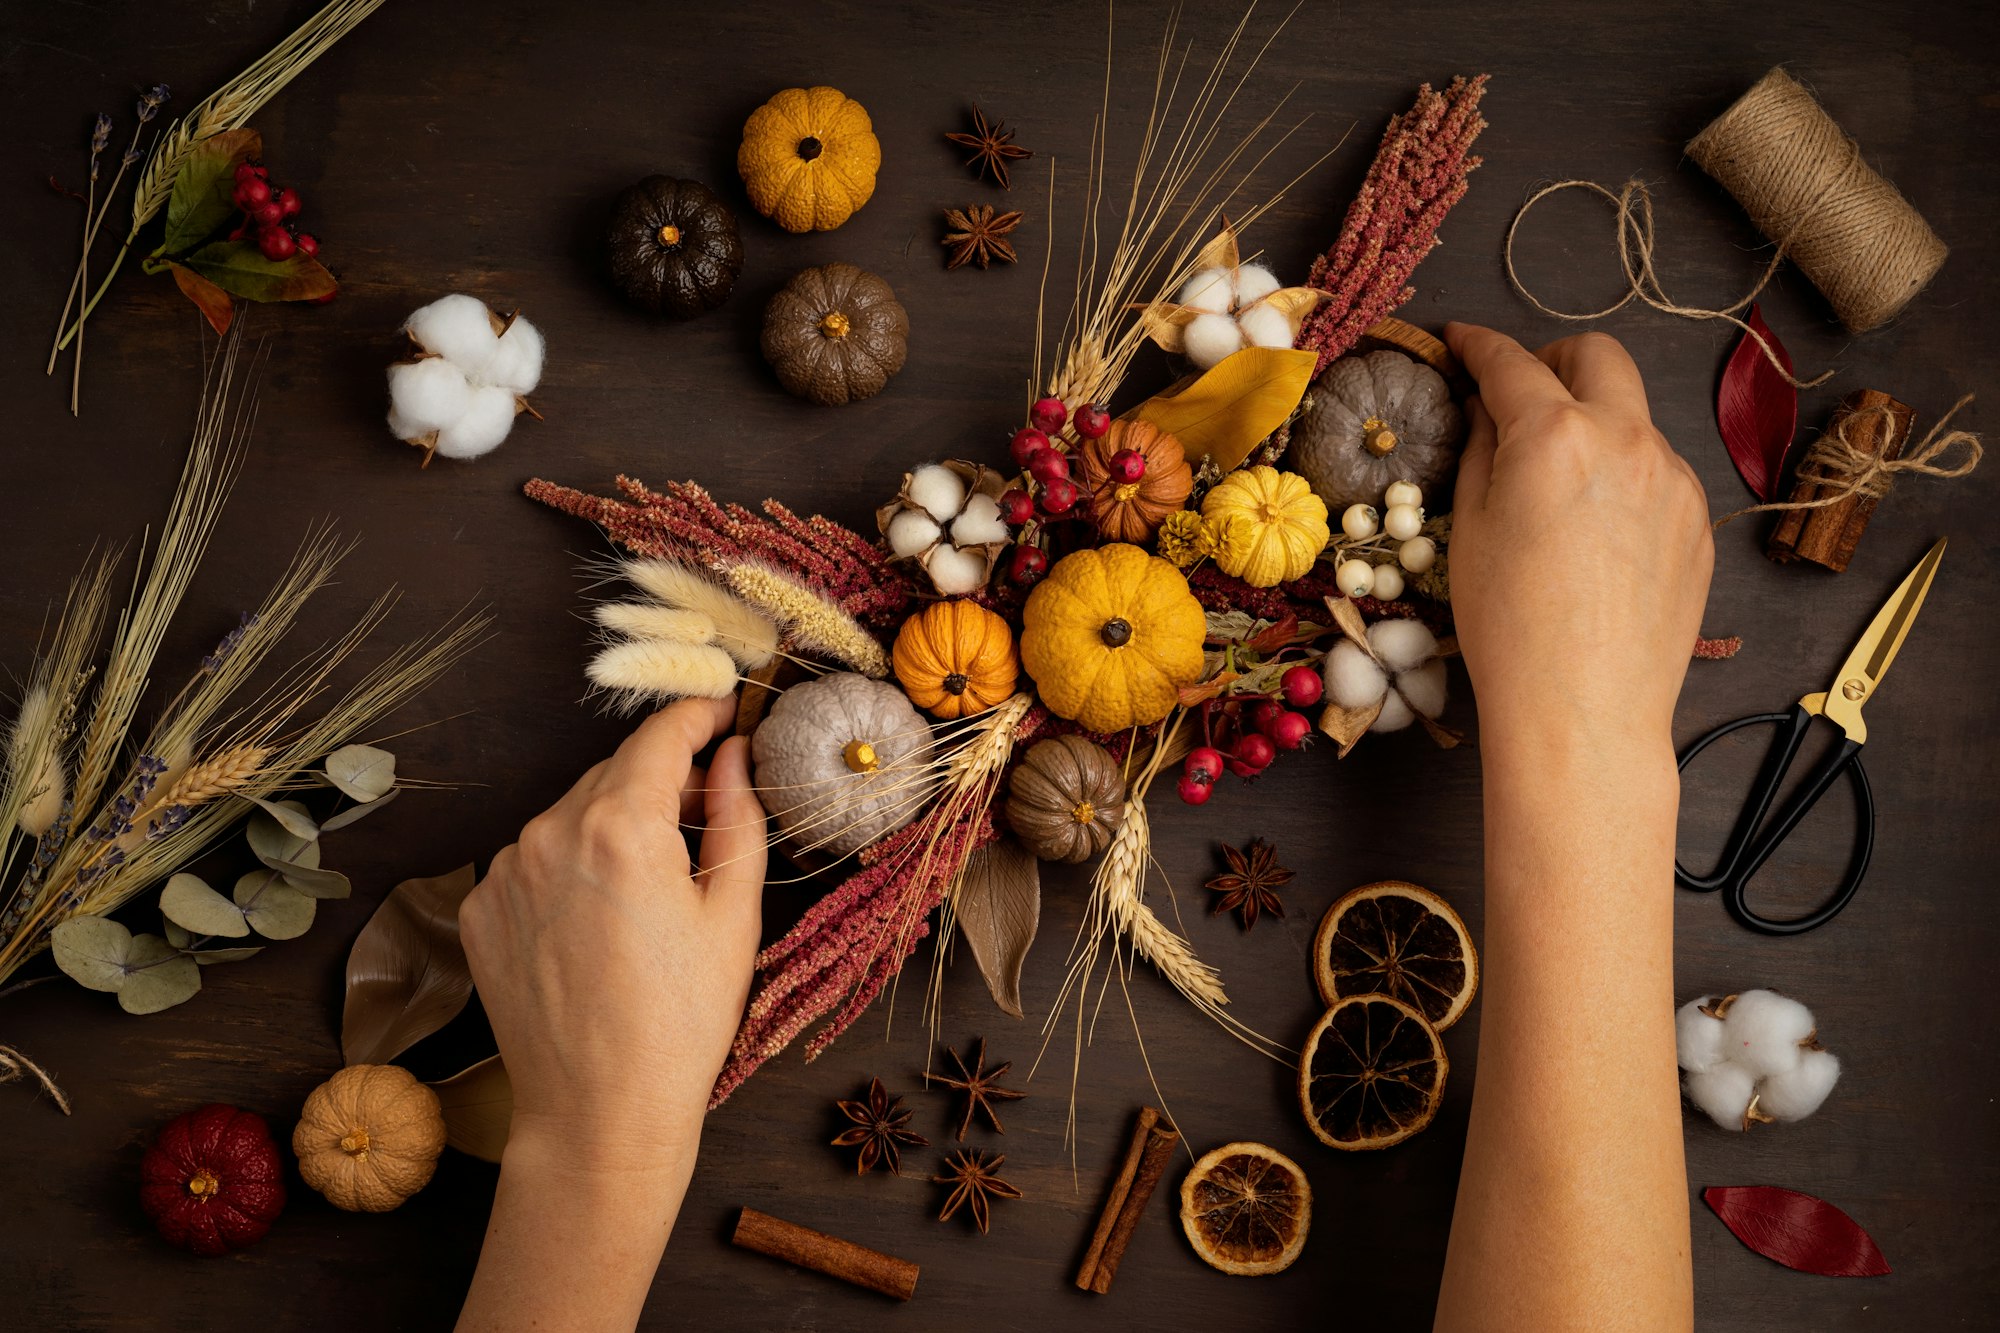 Diy rustic autumn table decoration. Floral interior decor for fall holidays